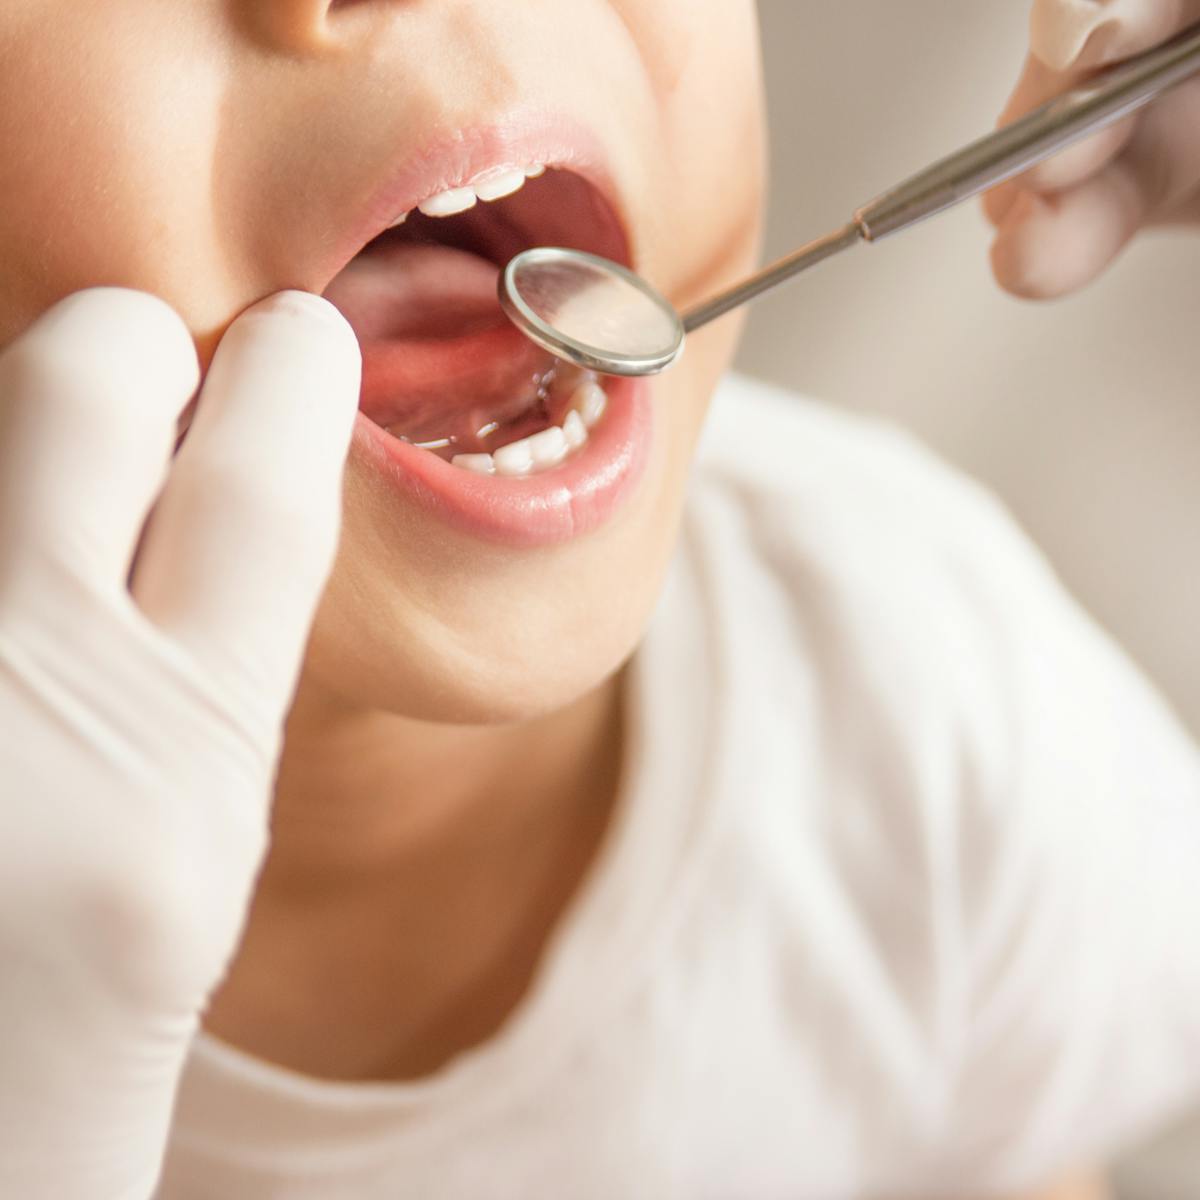 High cost means more than half of NZ's young adults don't access dental care